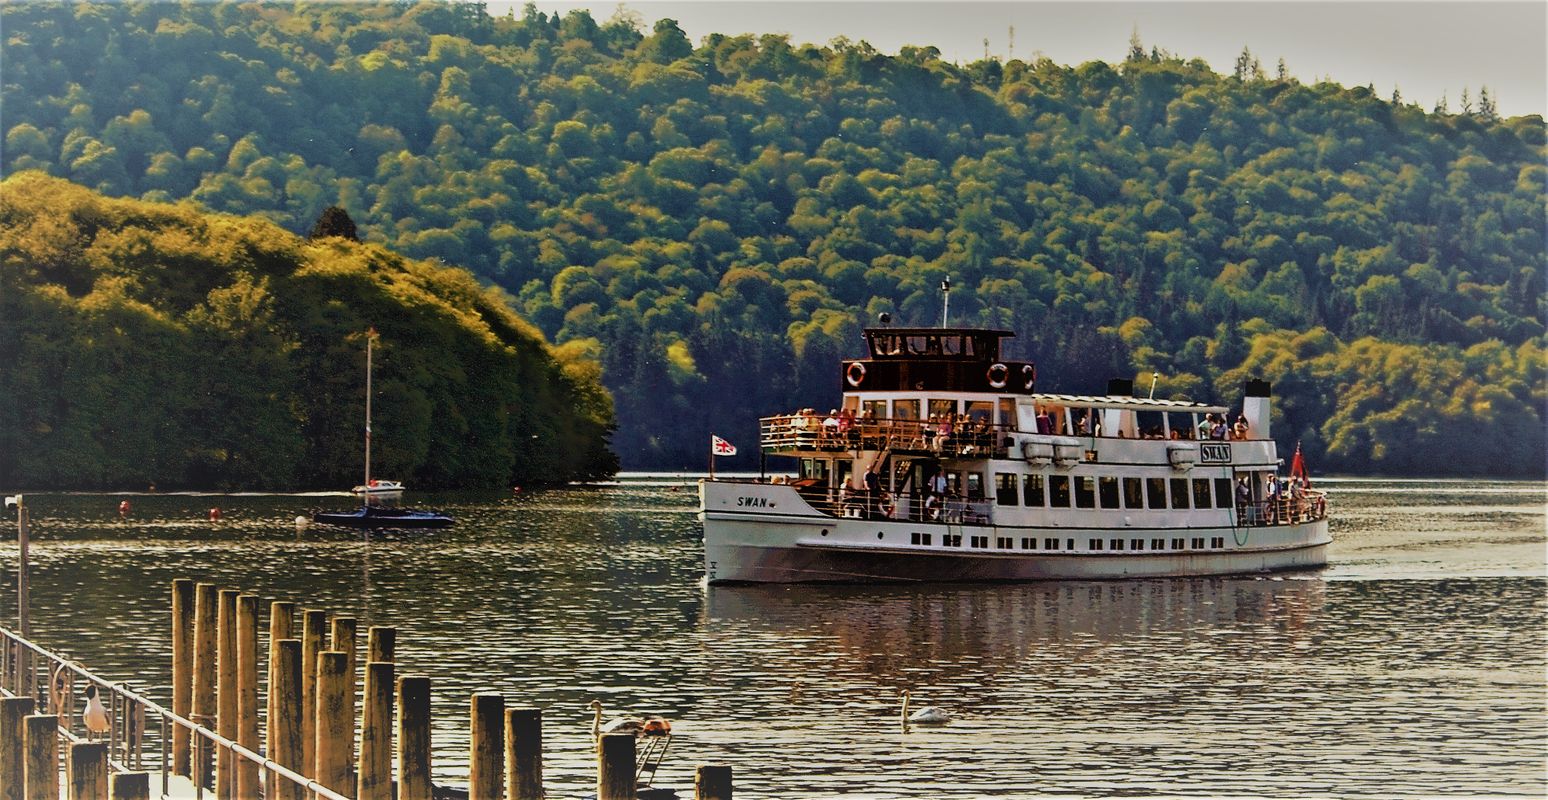 Lake Windermere Ferry - Clickasnap - It pays to share